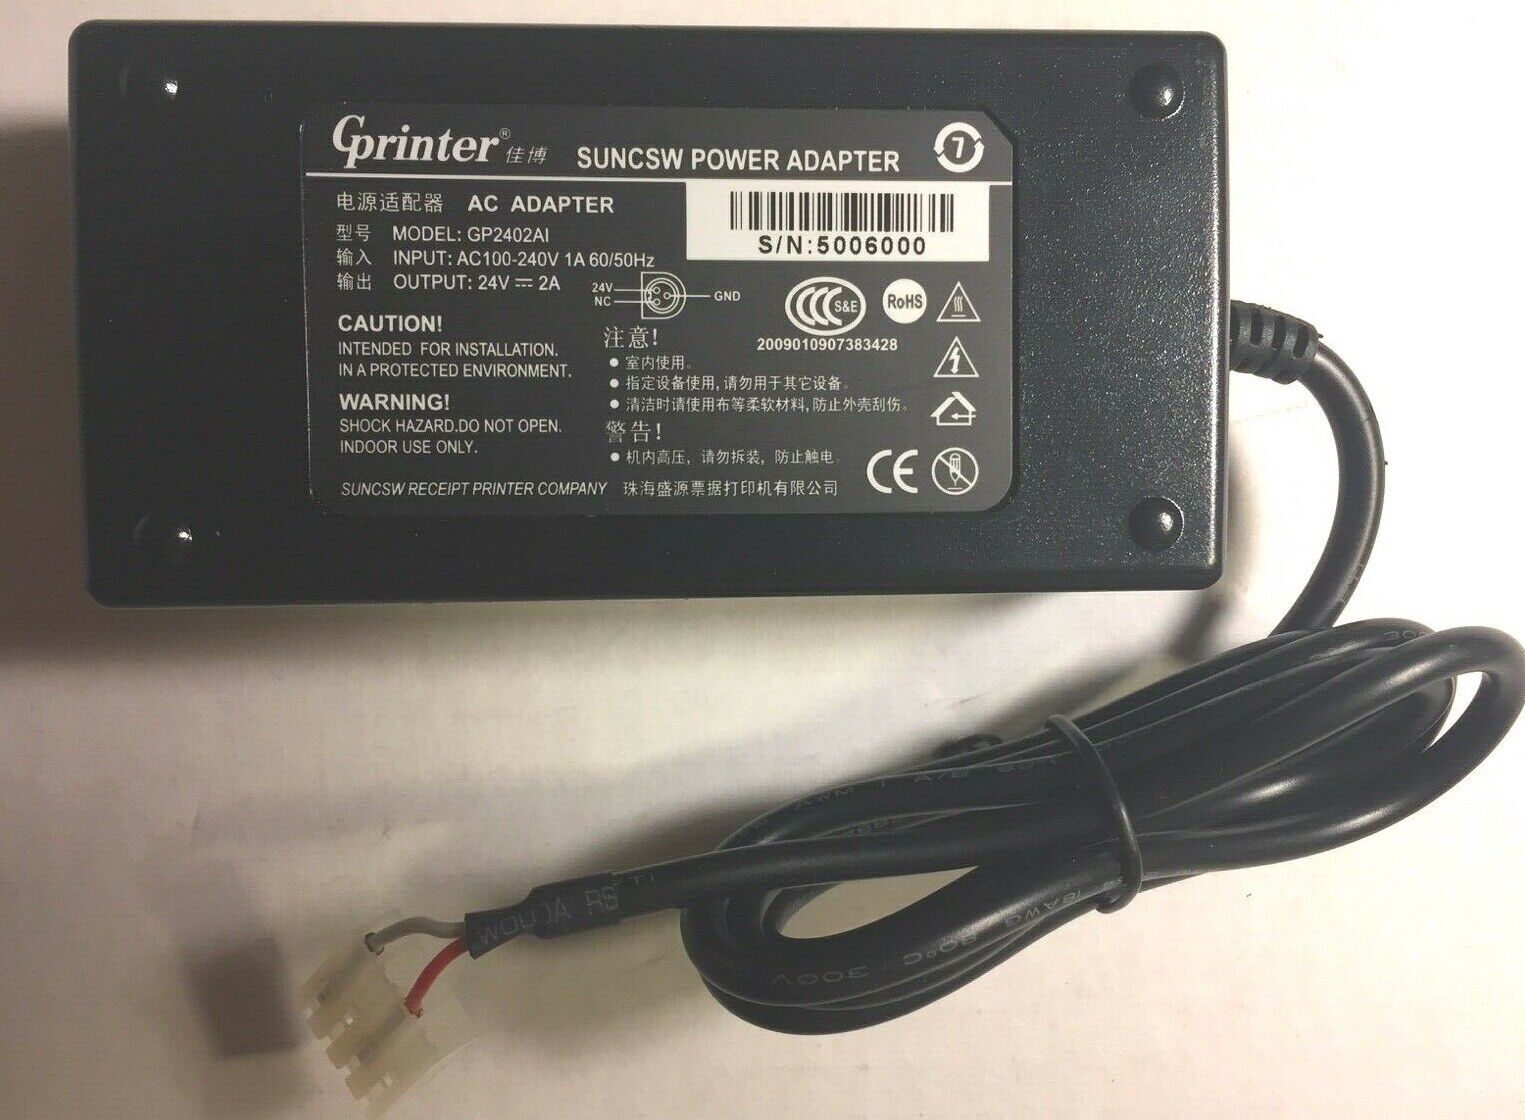 *Brand NEW* 24V 2A AC Adapter. Suncsw Power Adapter, Never Used Gprinter GP-2402AI. - Click Image to Close